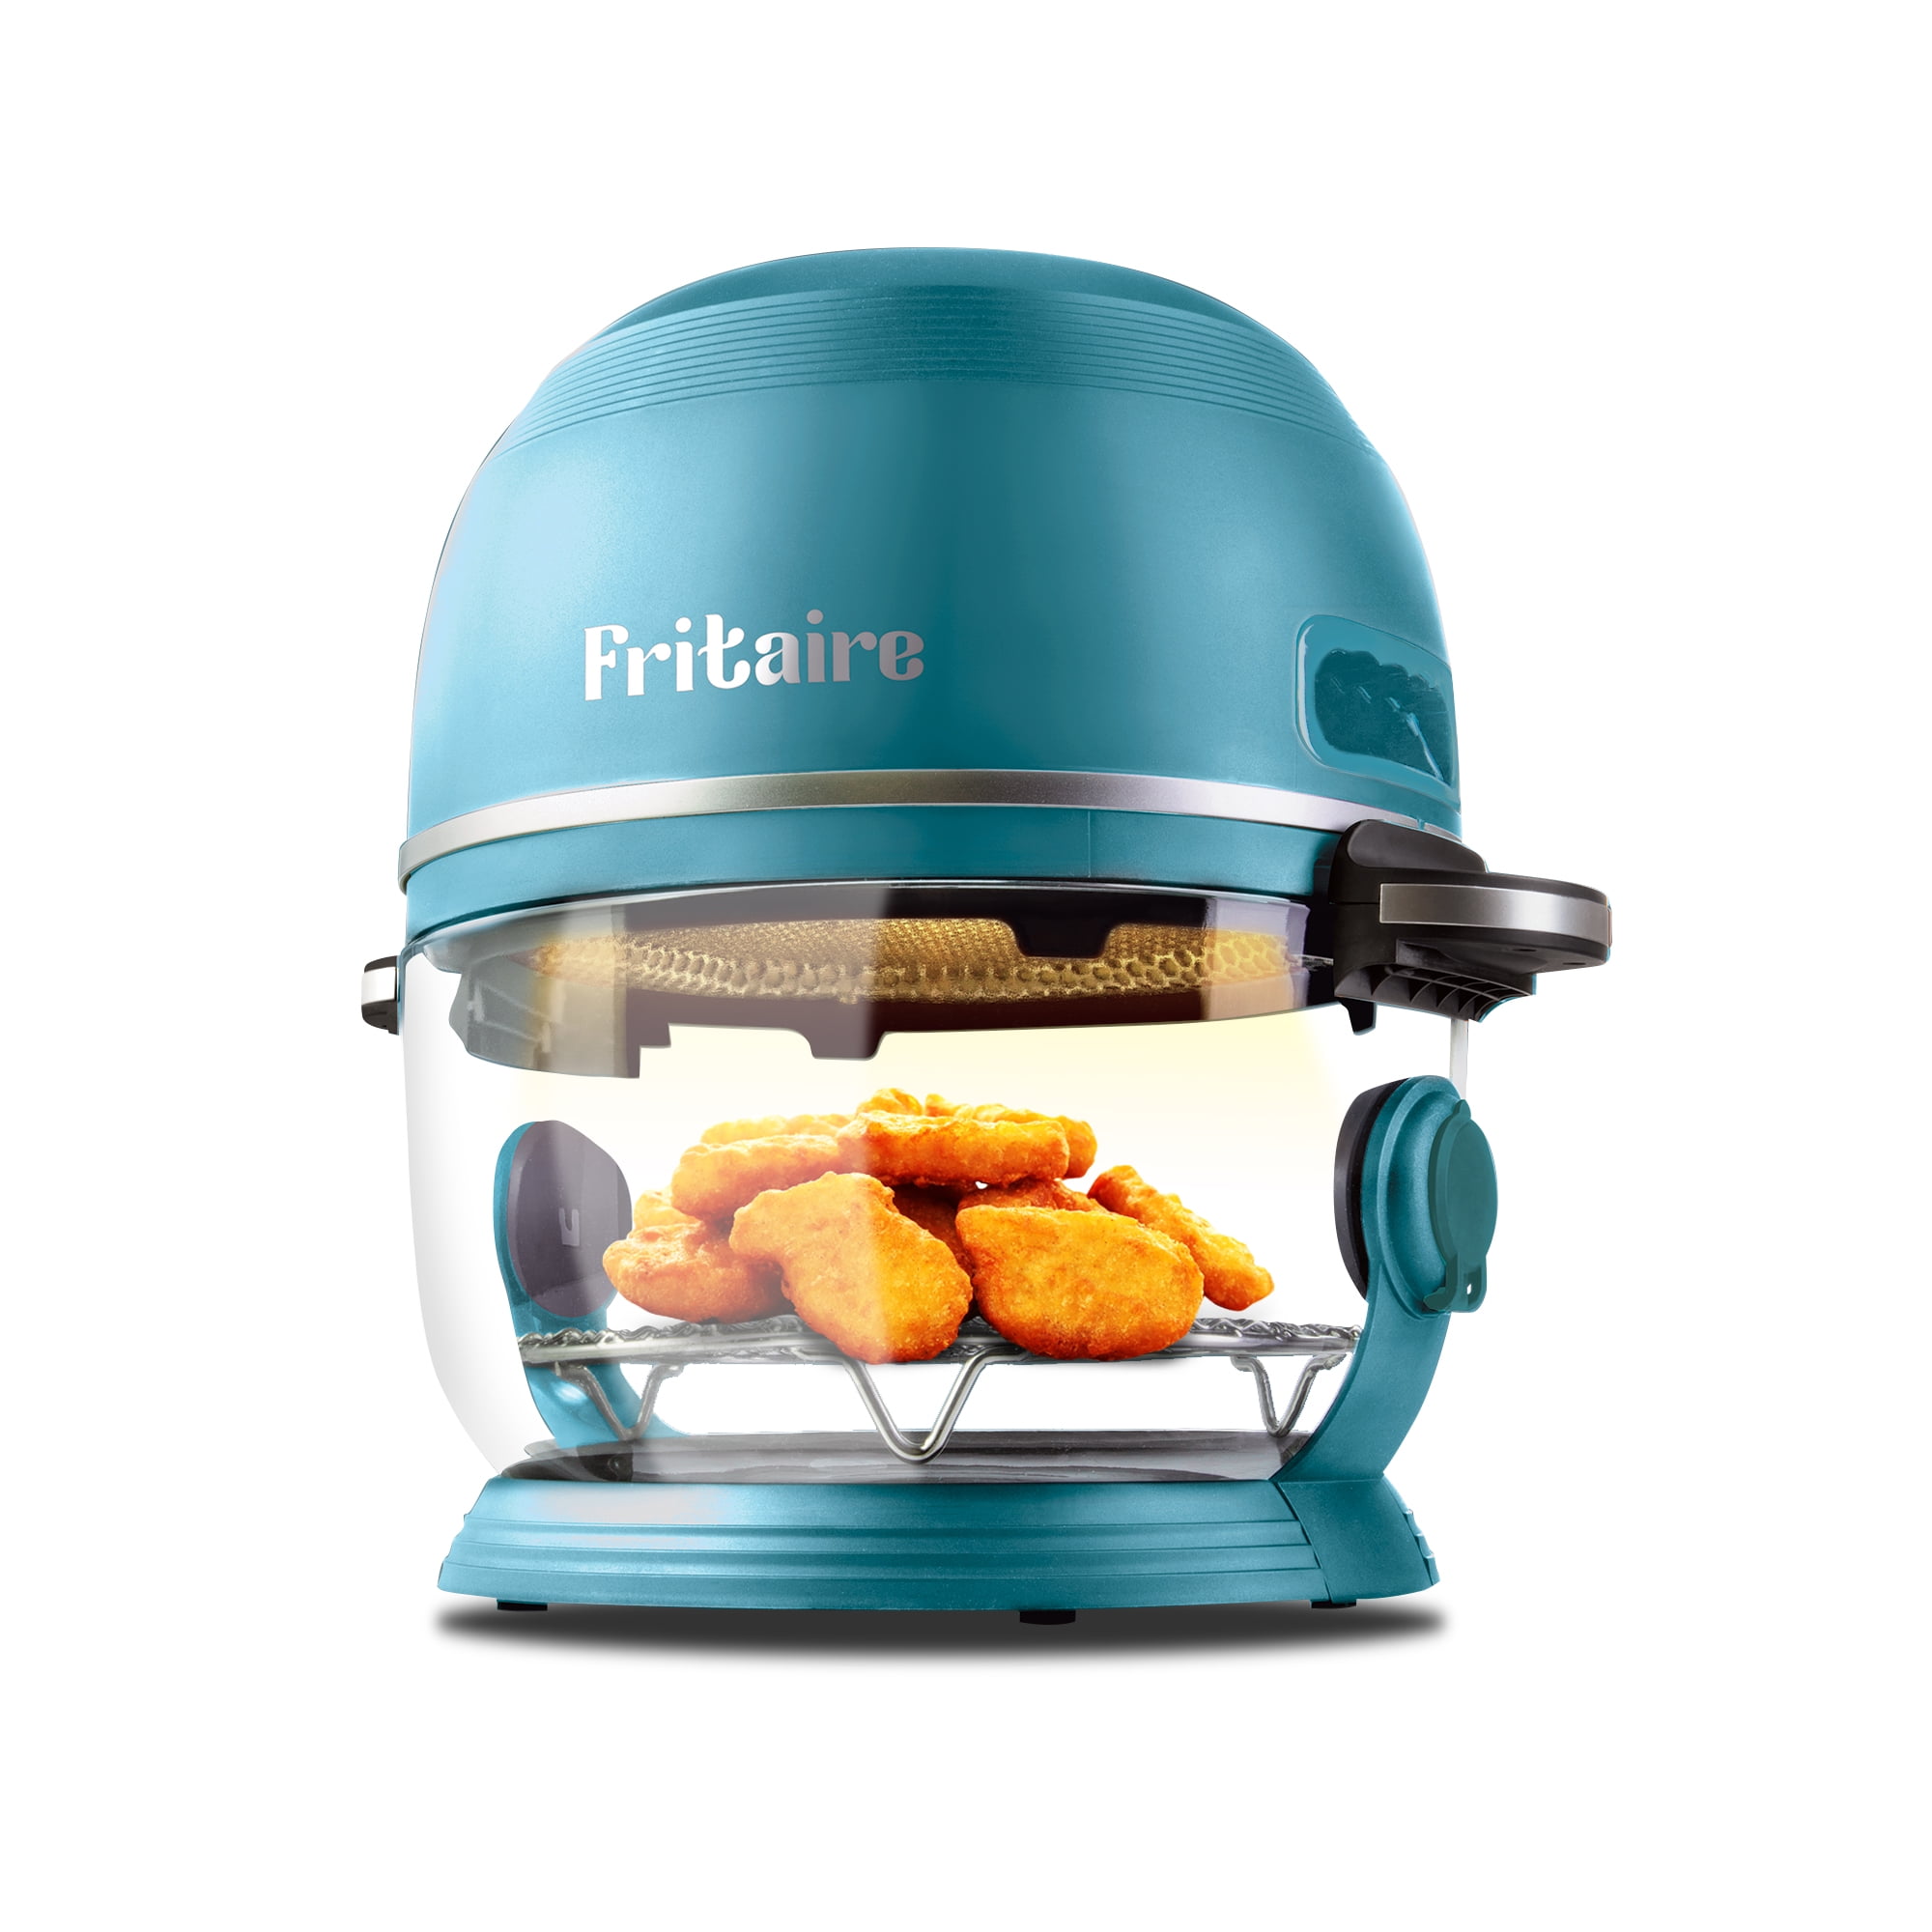 Healthy Air Fryer with Glass Bowl